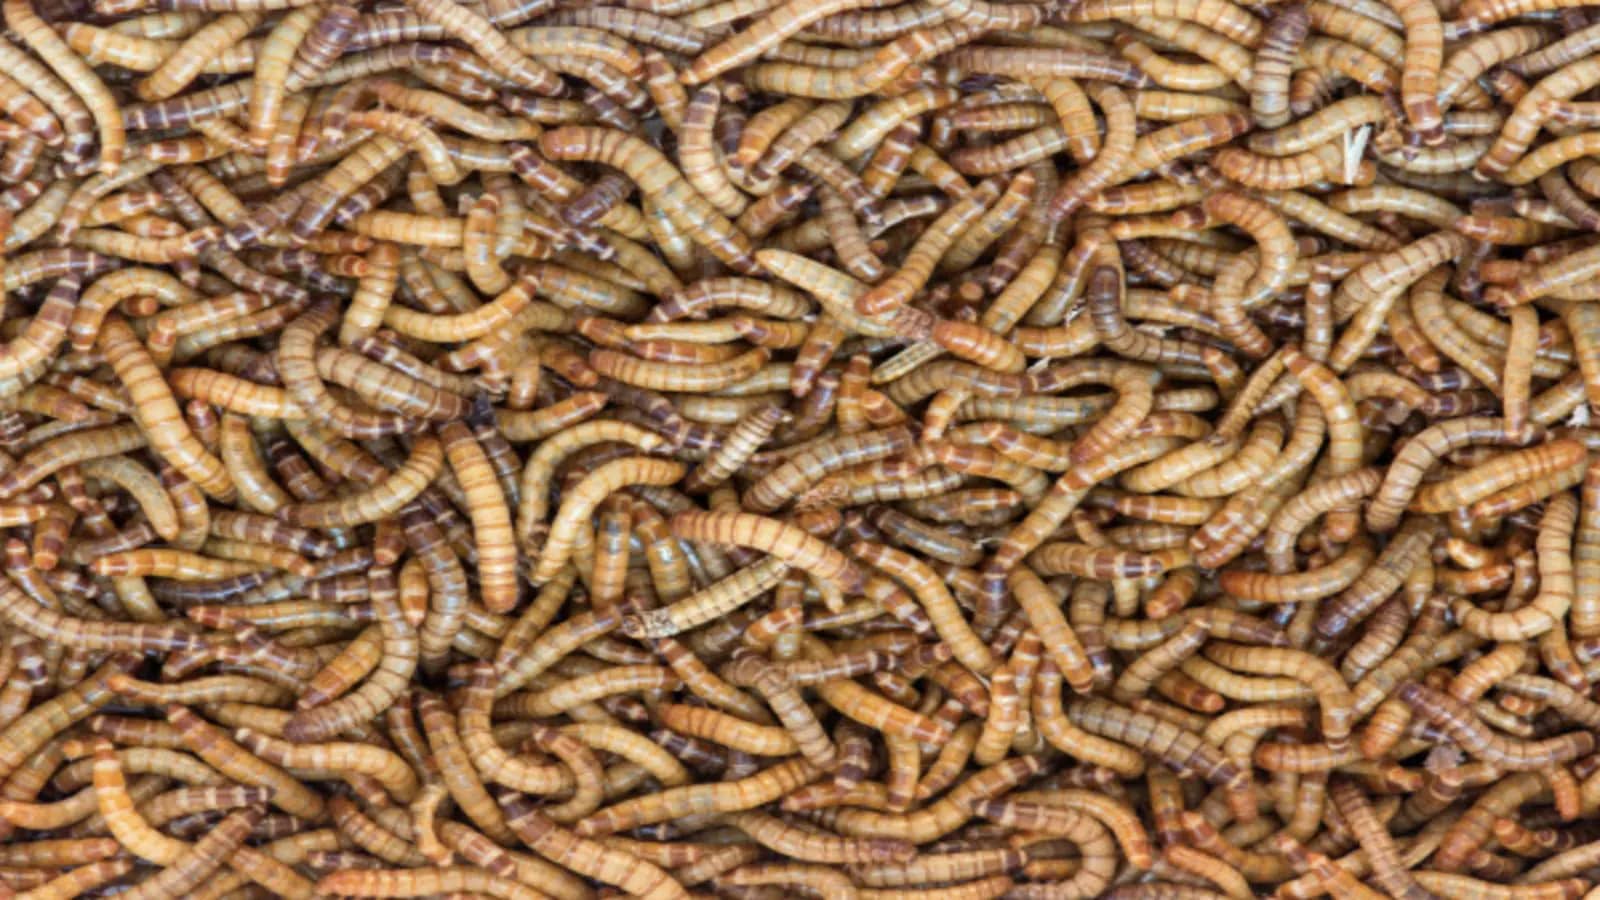 FreezeM and Hermetia partner to optimize insect protein production